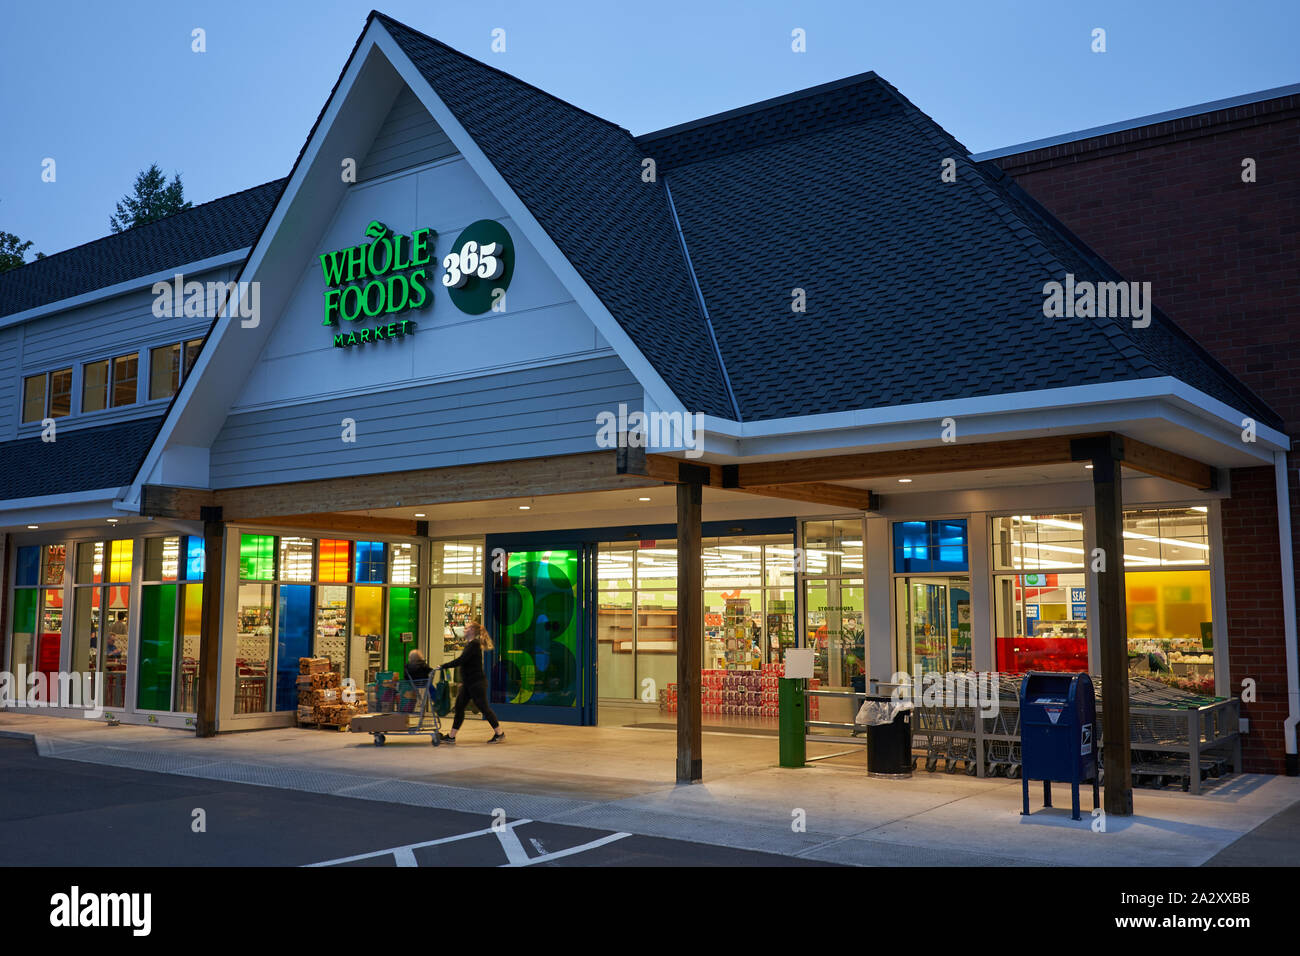 https://c8.alamy.com/comp/2A2XXBB/the-entrance-to-a-whole-foods-market-365-store-in-lake-oswego-a-southern-suburb-within-the-portland-metro-area-in-the-evening-2A2XXBB.jpg